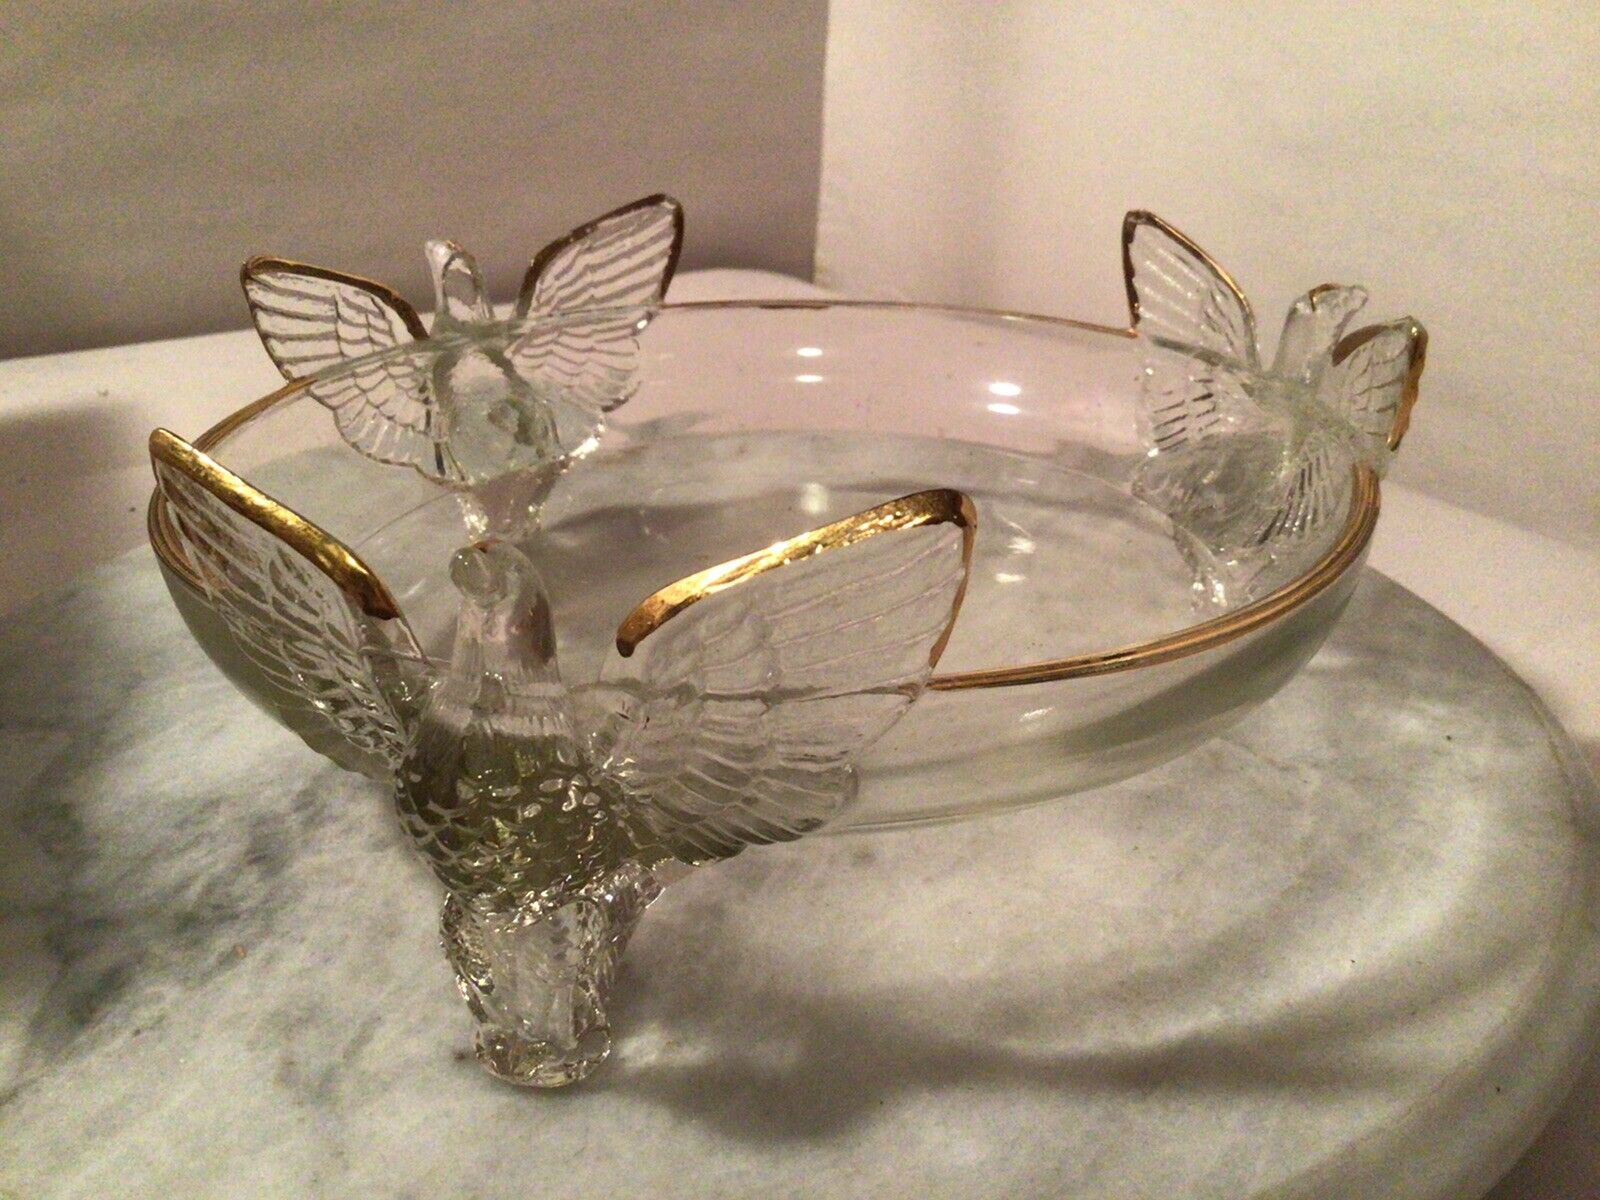 Vintage Glass Bowl With Three Eagles 7 Inch Across